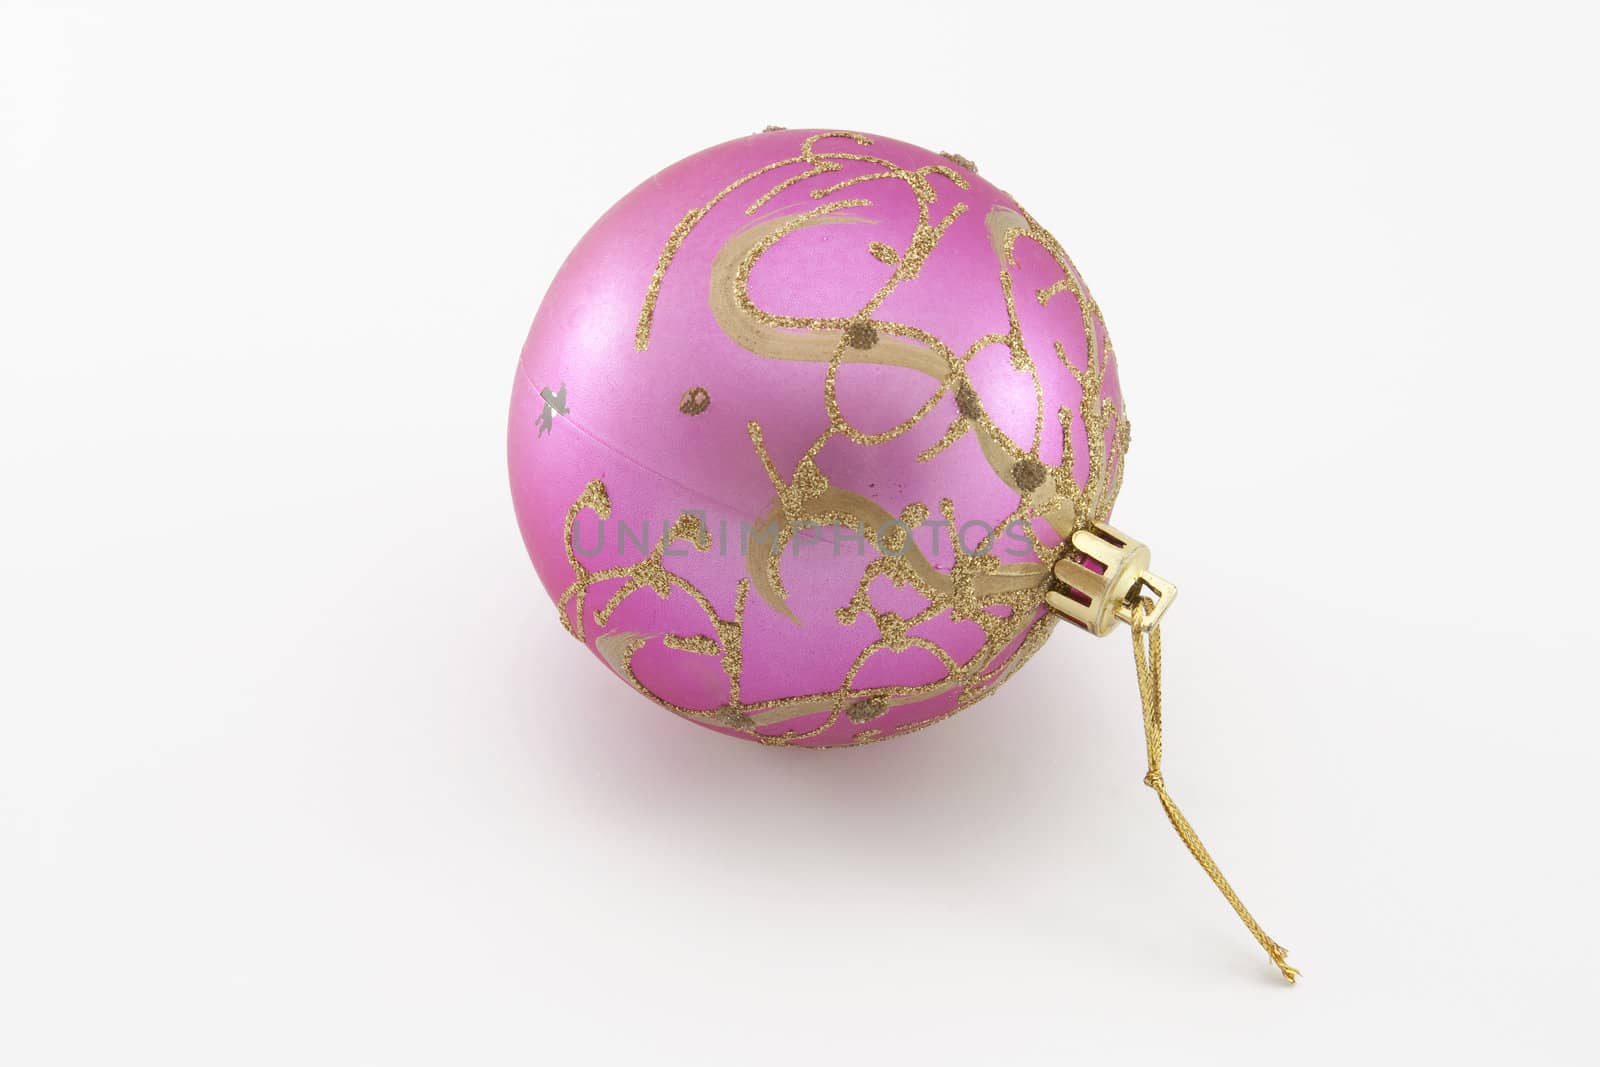 Fur-tree toy - a pink sphere on the white backgroud